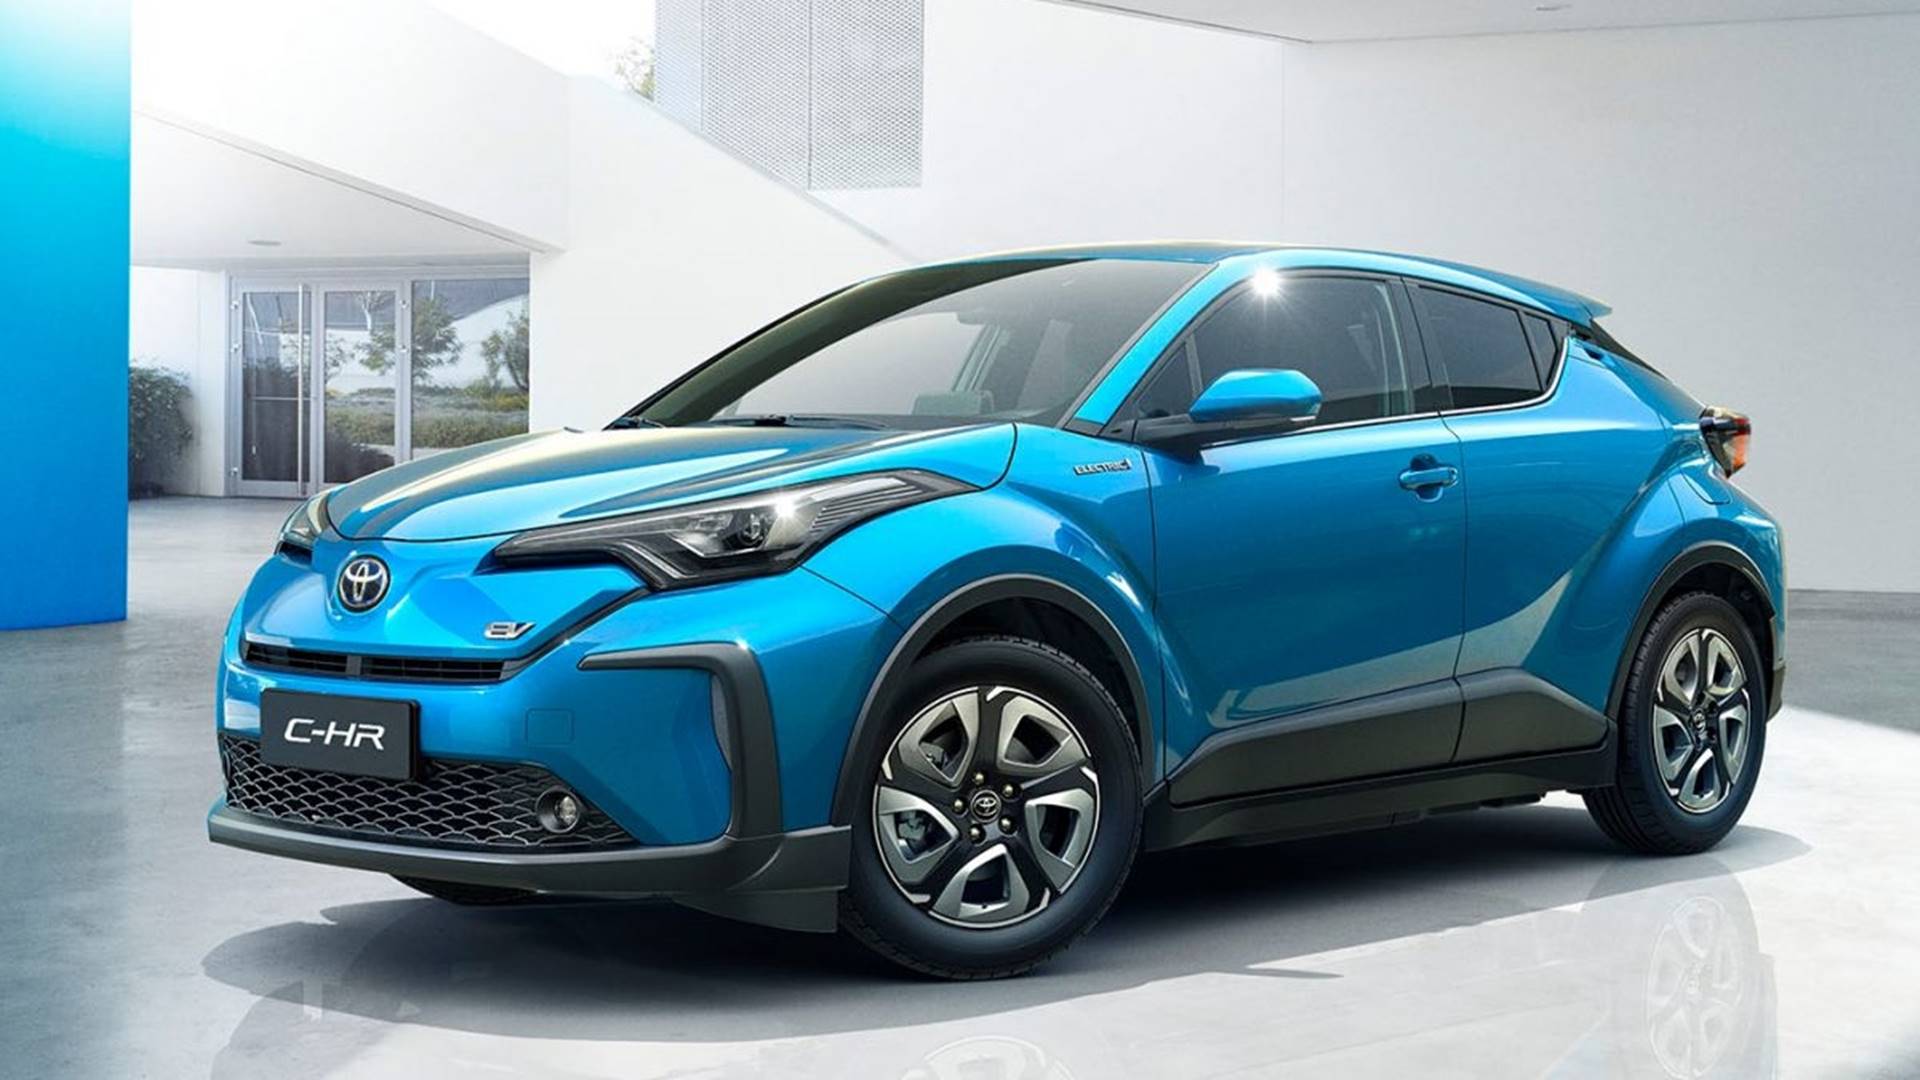 hypotese surfing Rubin The next European Toyota C-HR will have electric - Latest Car News